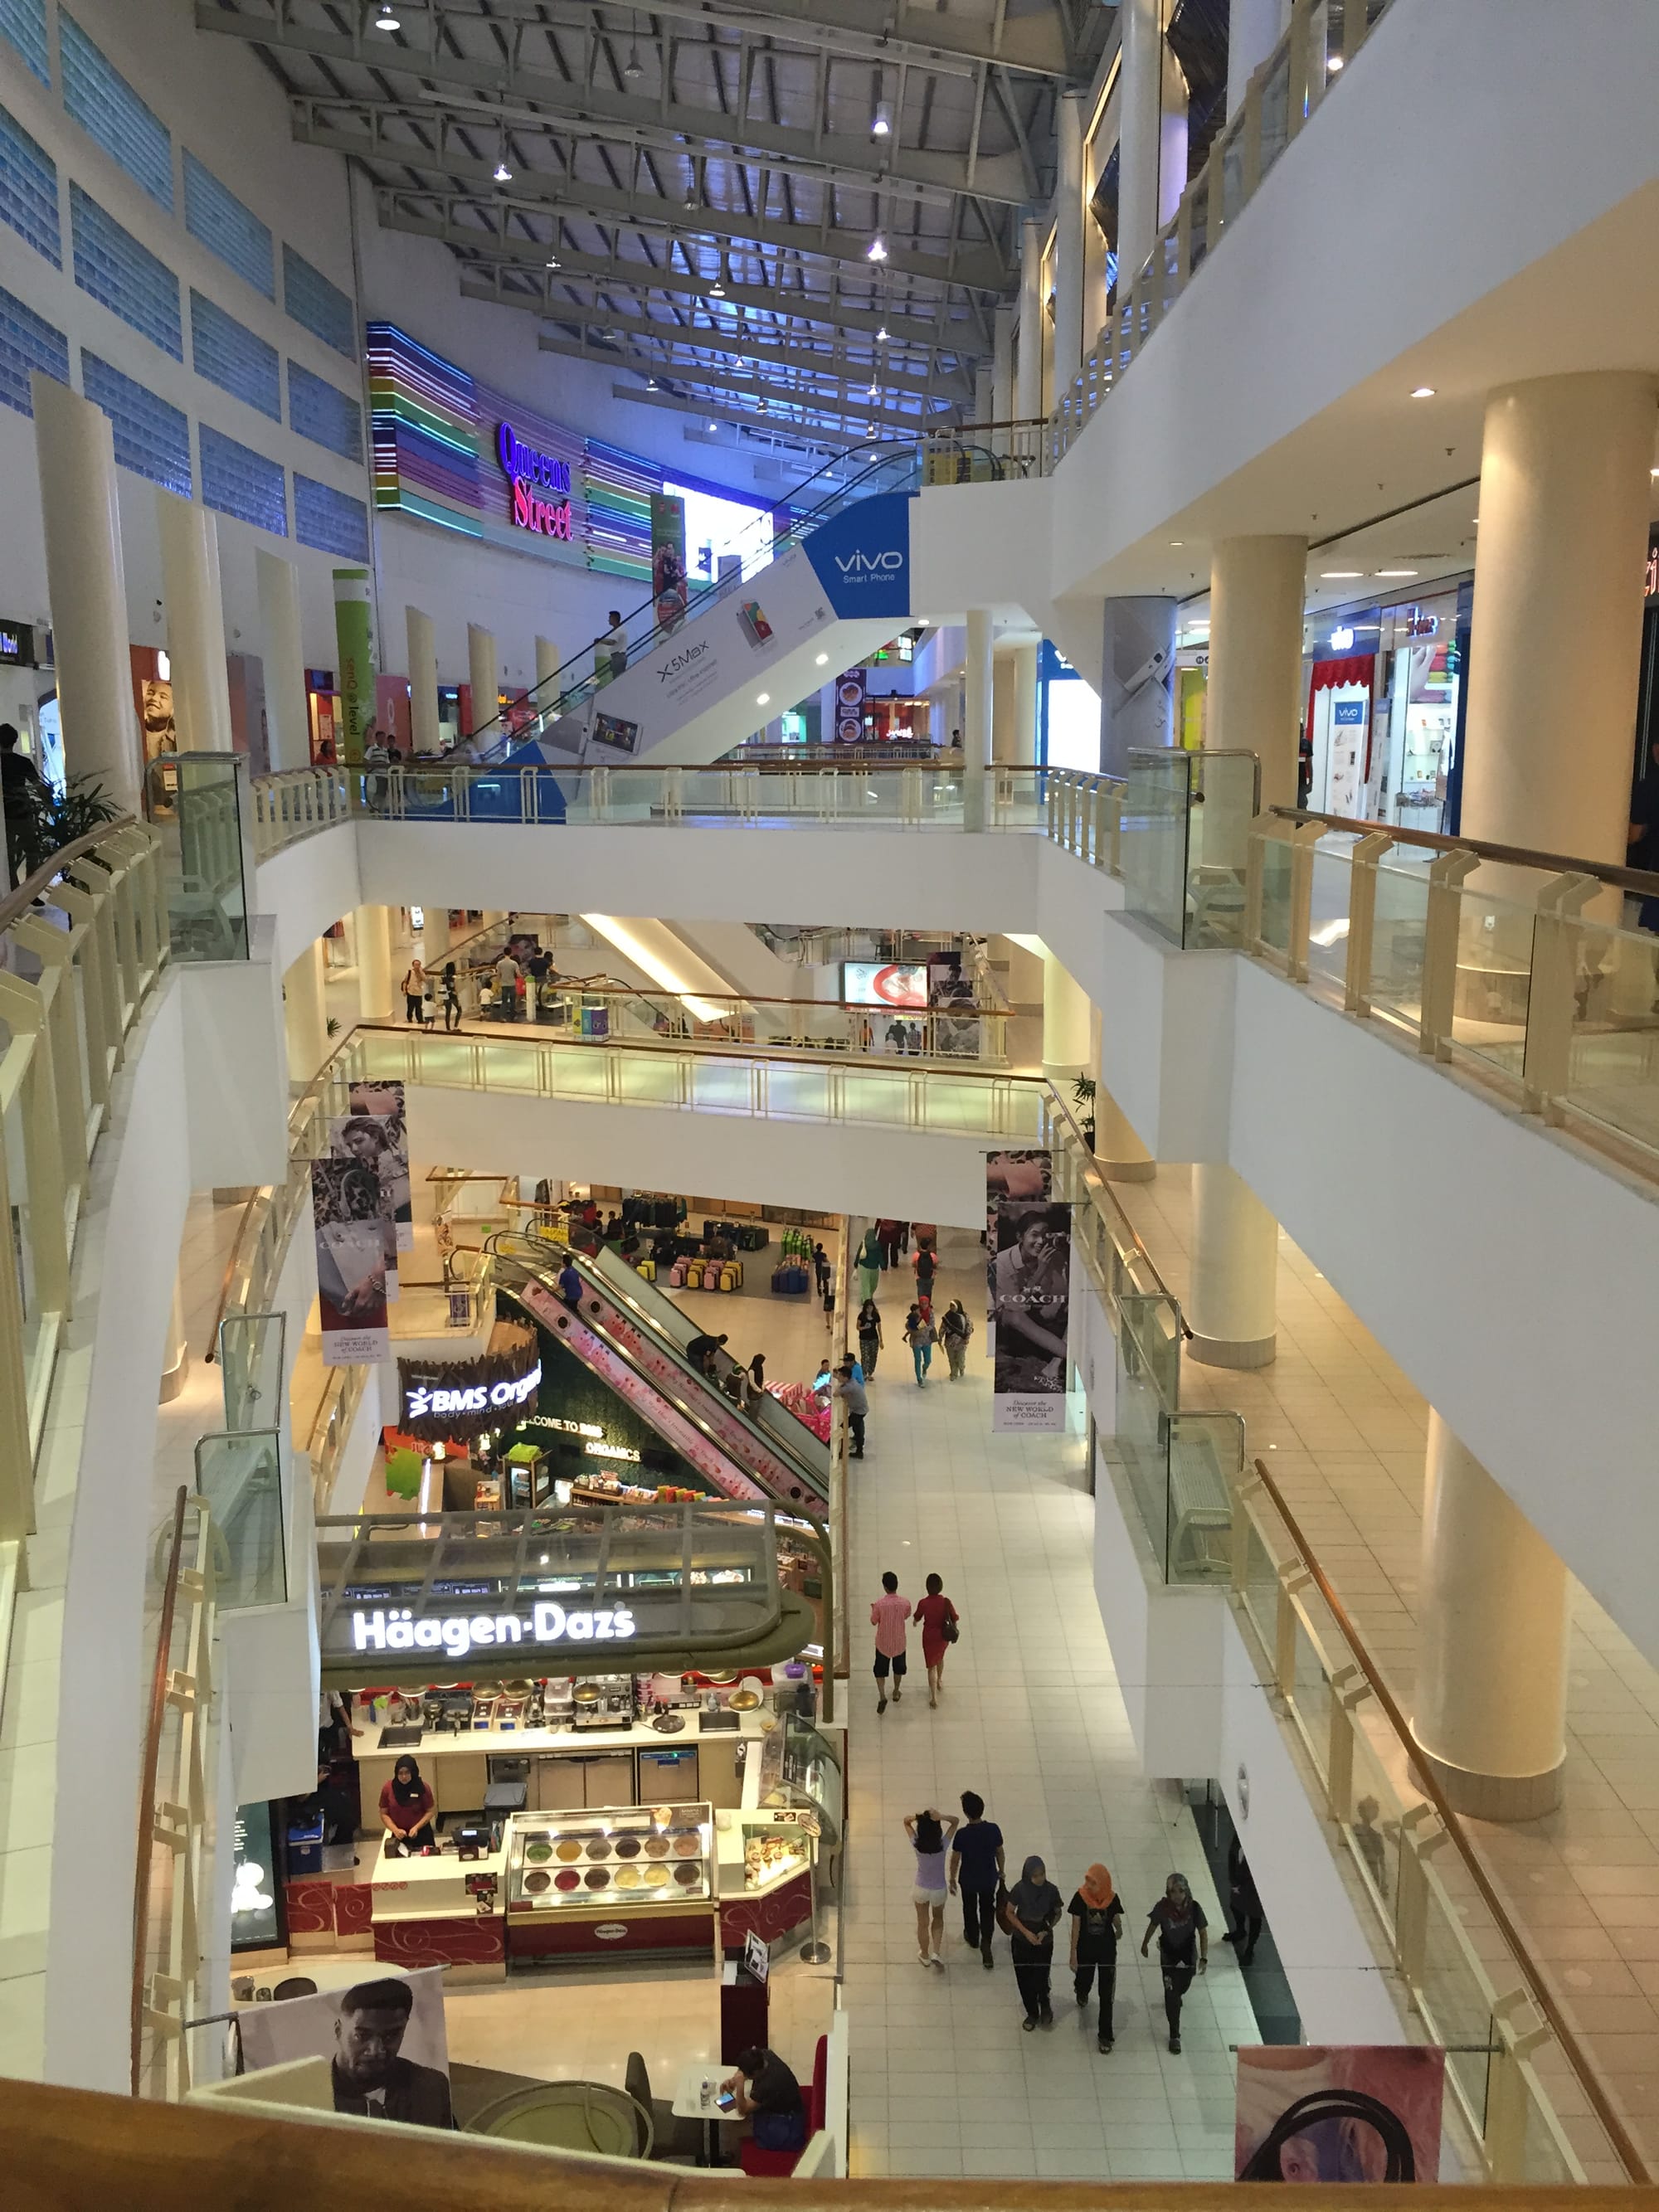 Photo by Author — inside the Queensbay Mall, Bayan Lepas, Penang, Malaysia